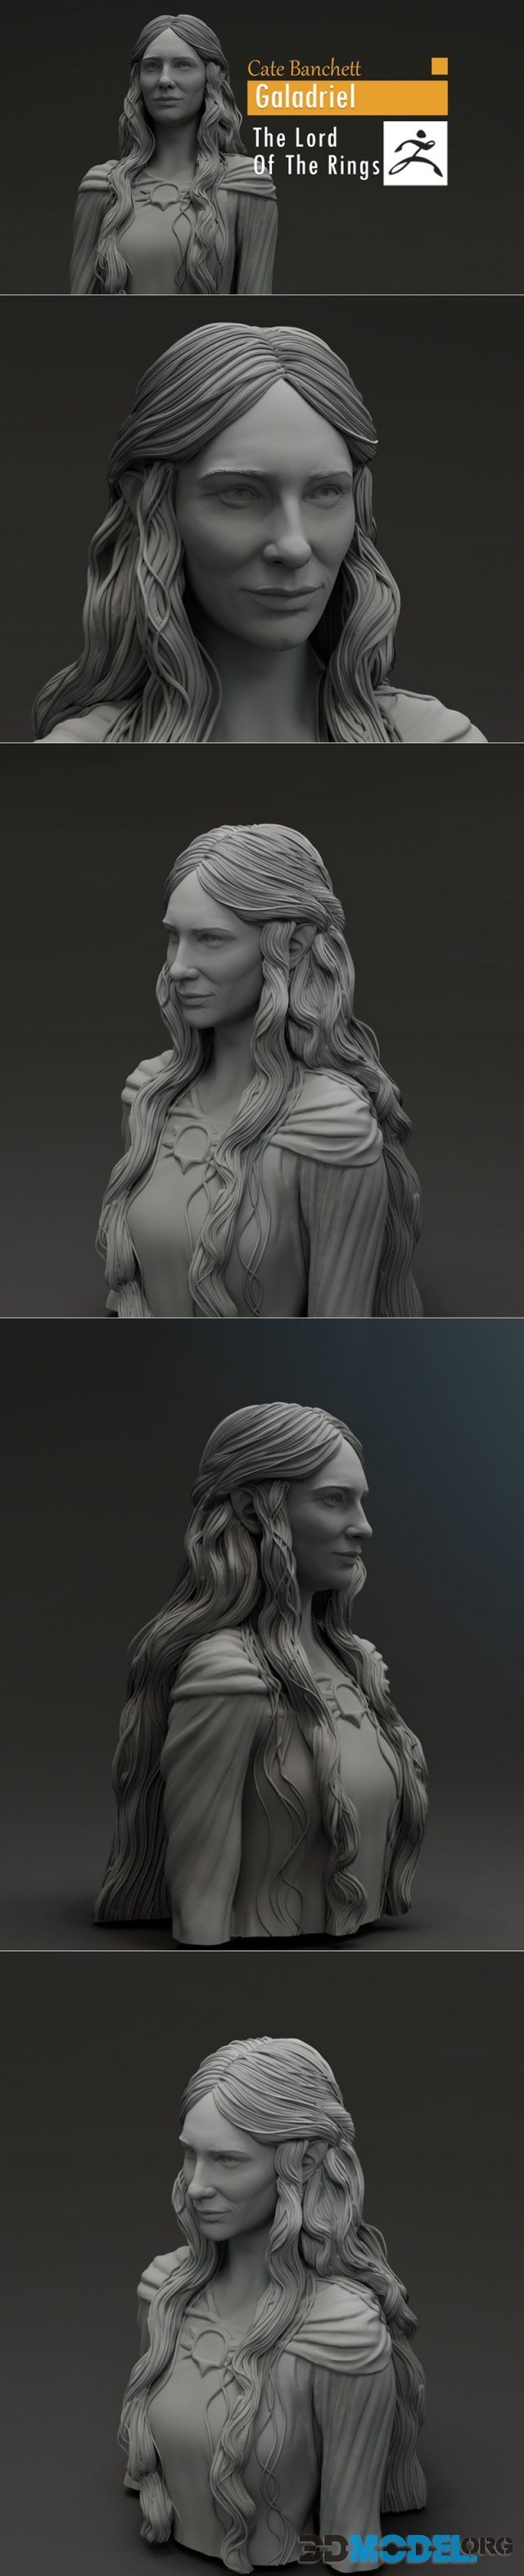 Cate Blanchet - Galadriel - The Lord Of The RIngs – Printable